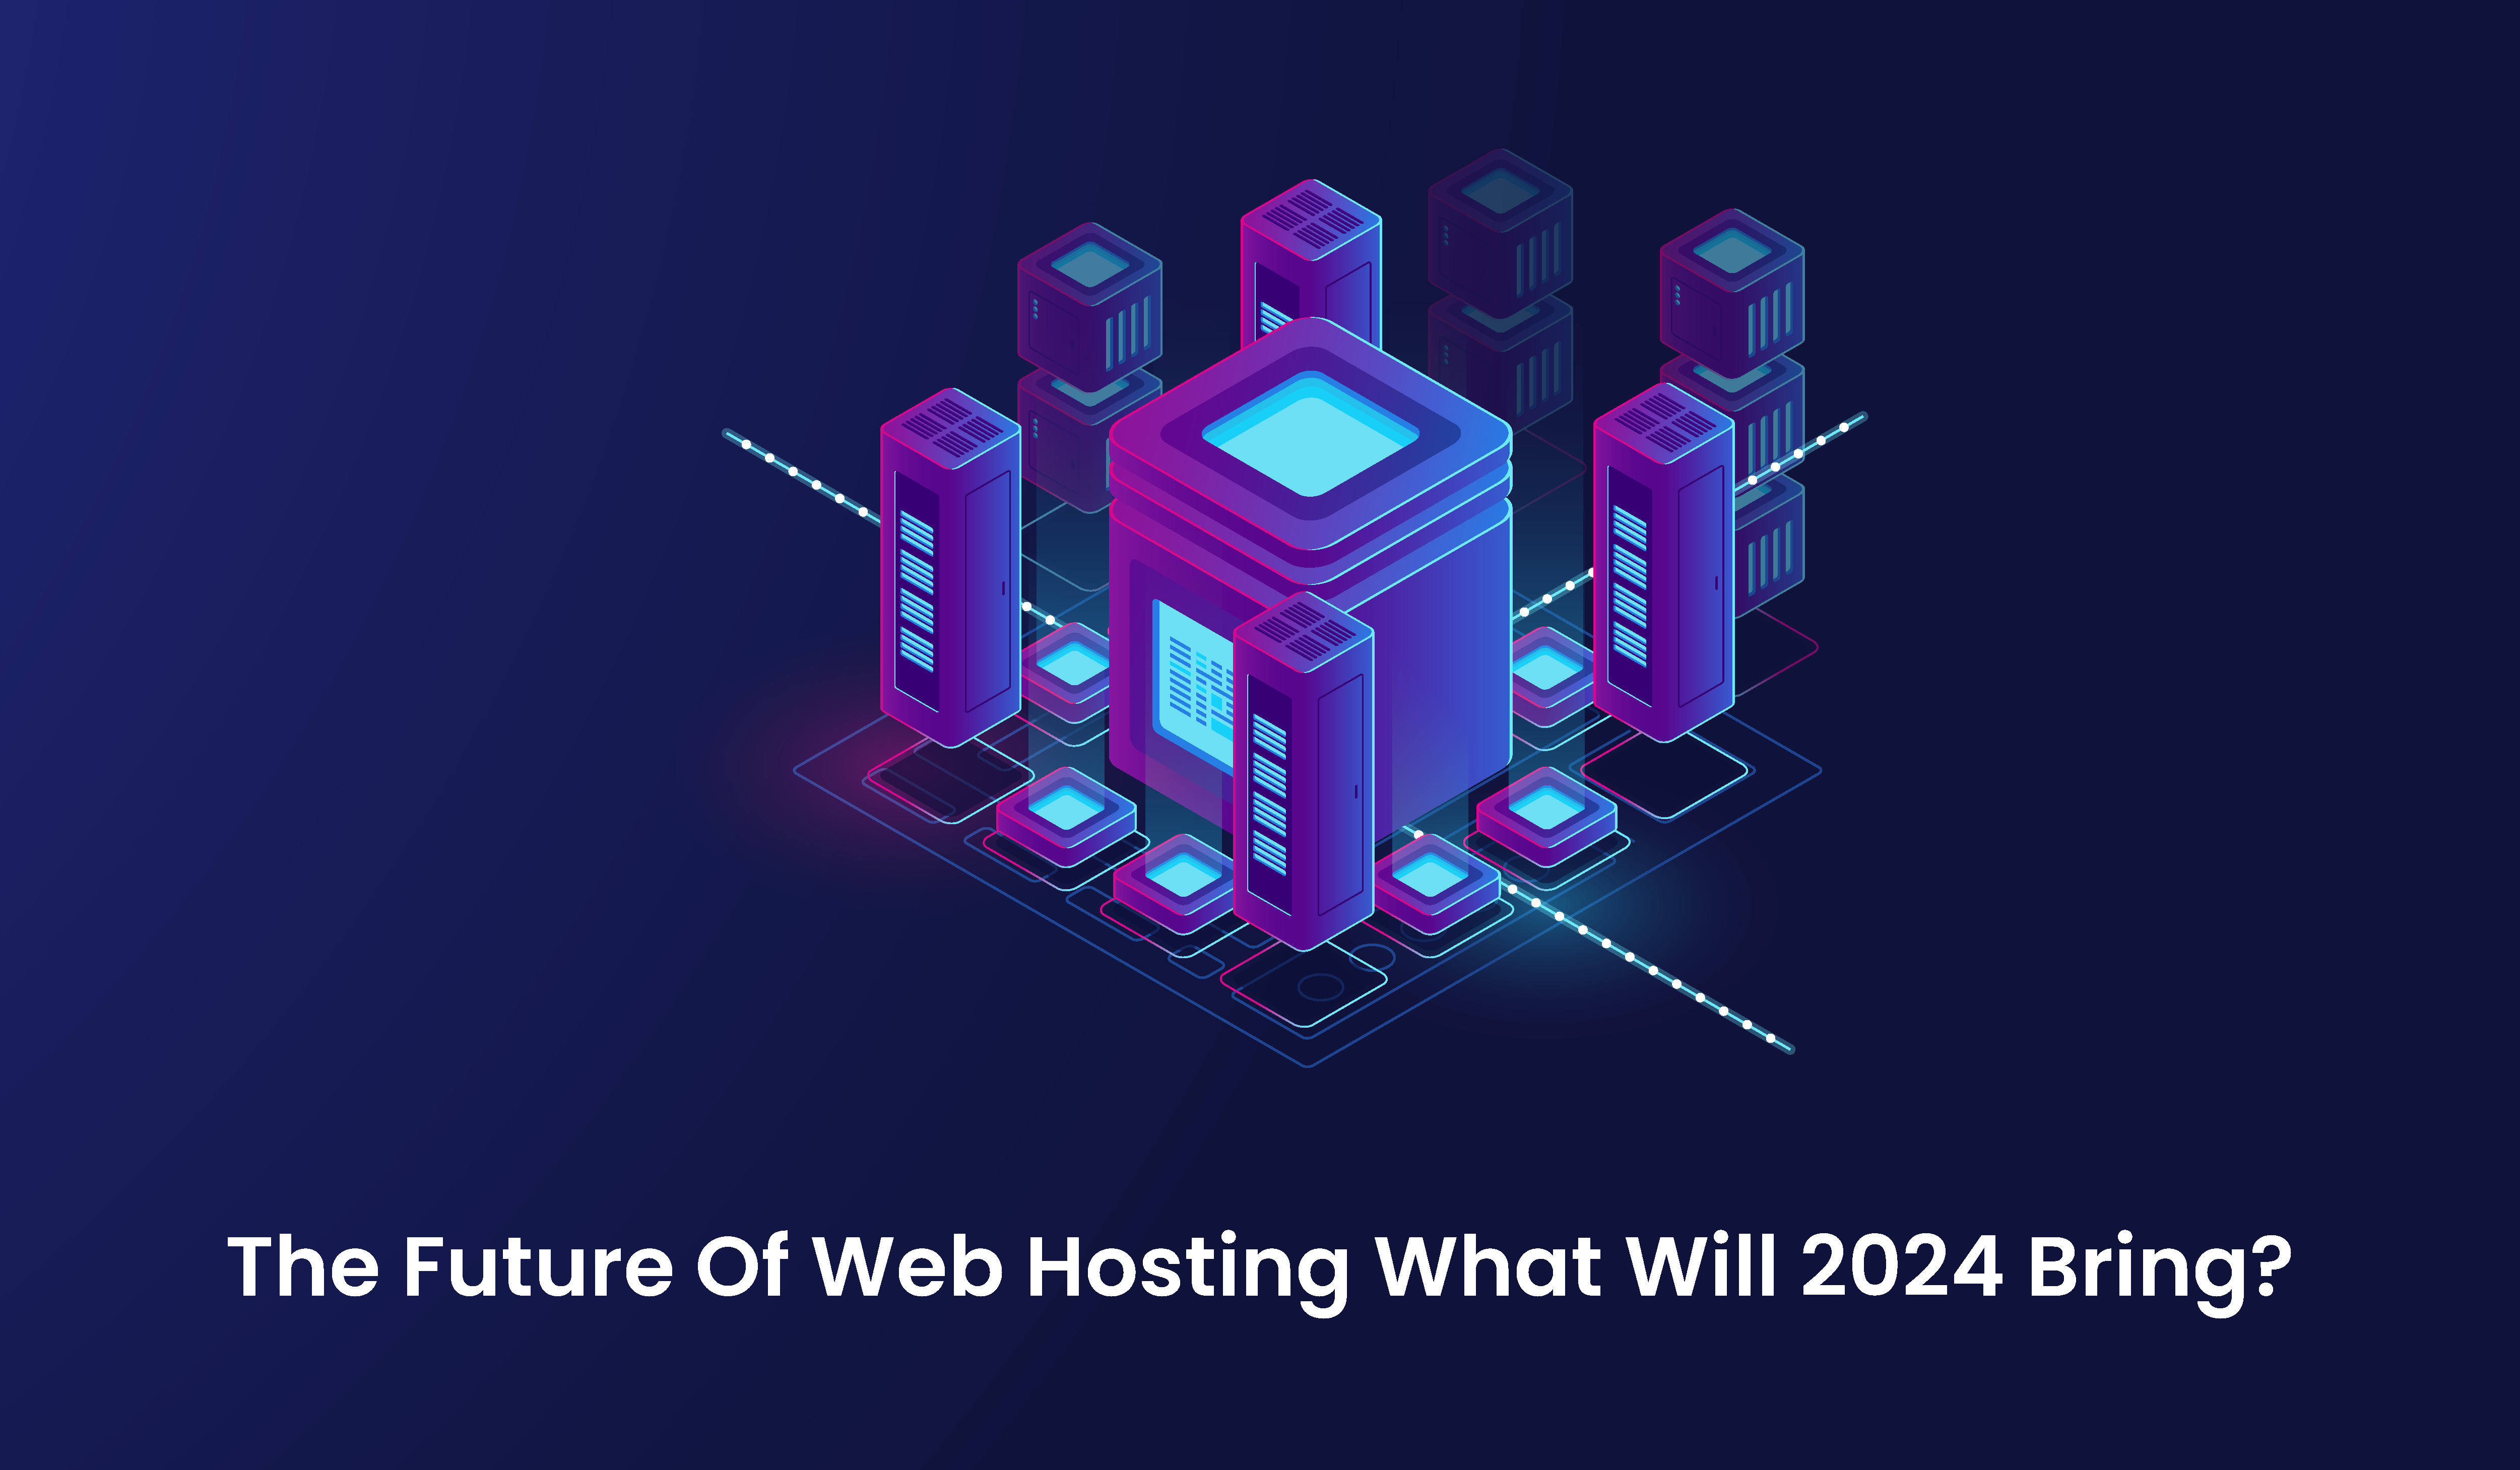 The Future Of Web Hosting: What Will 2024 Bring?